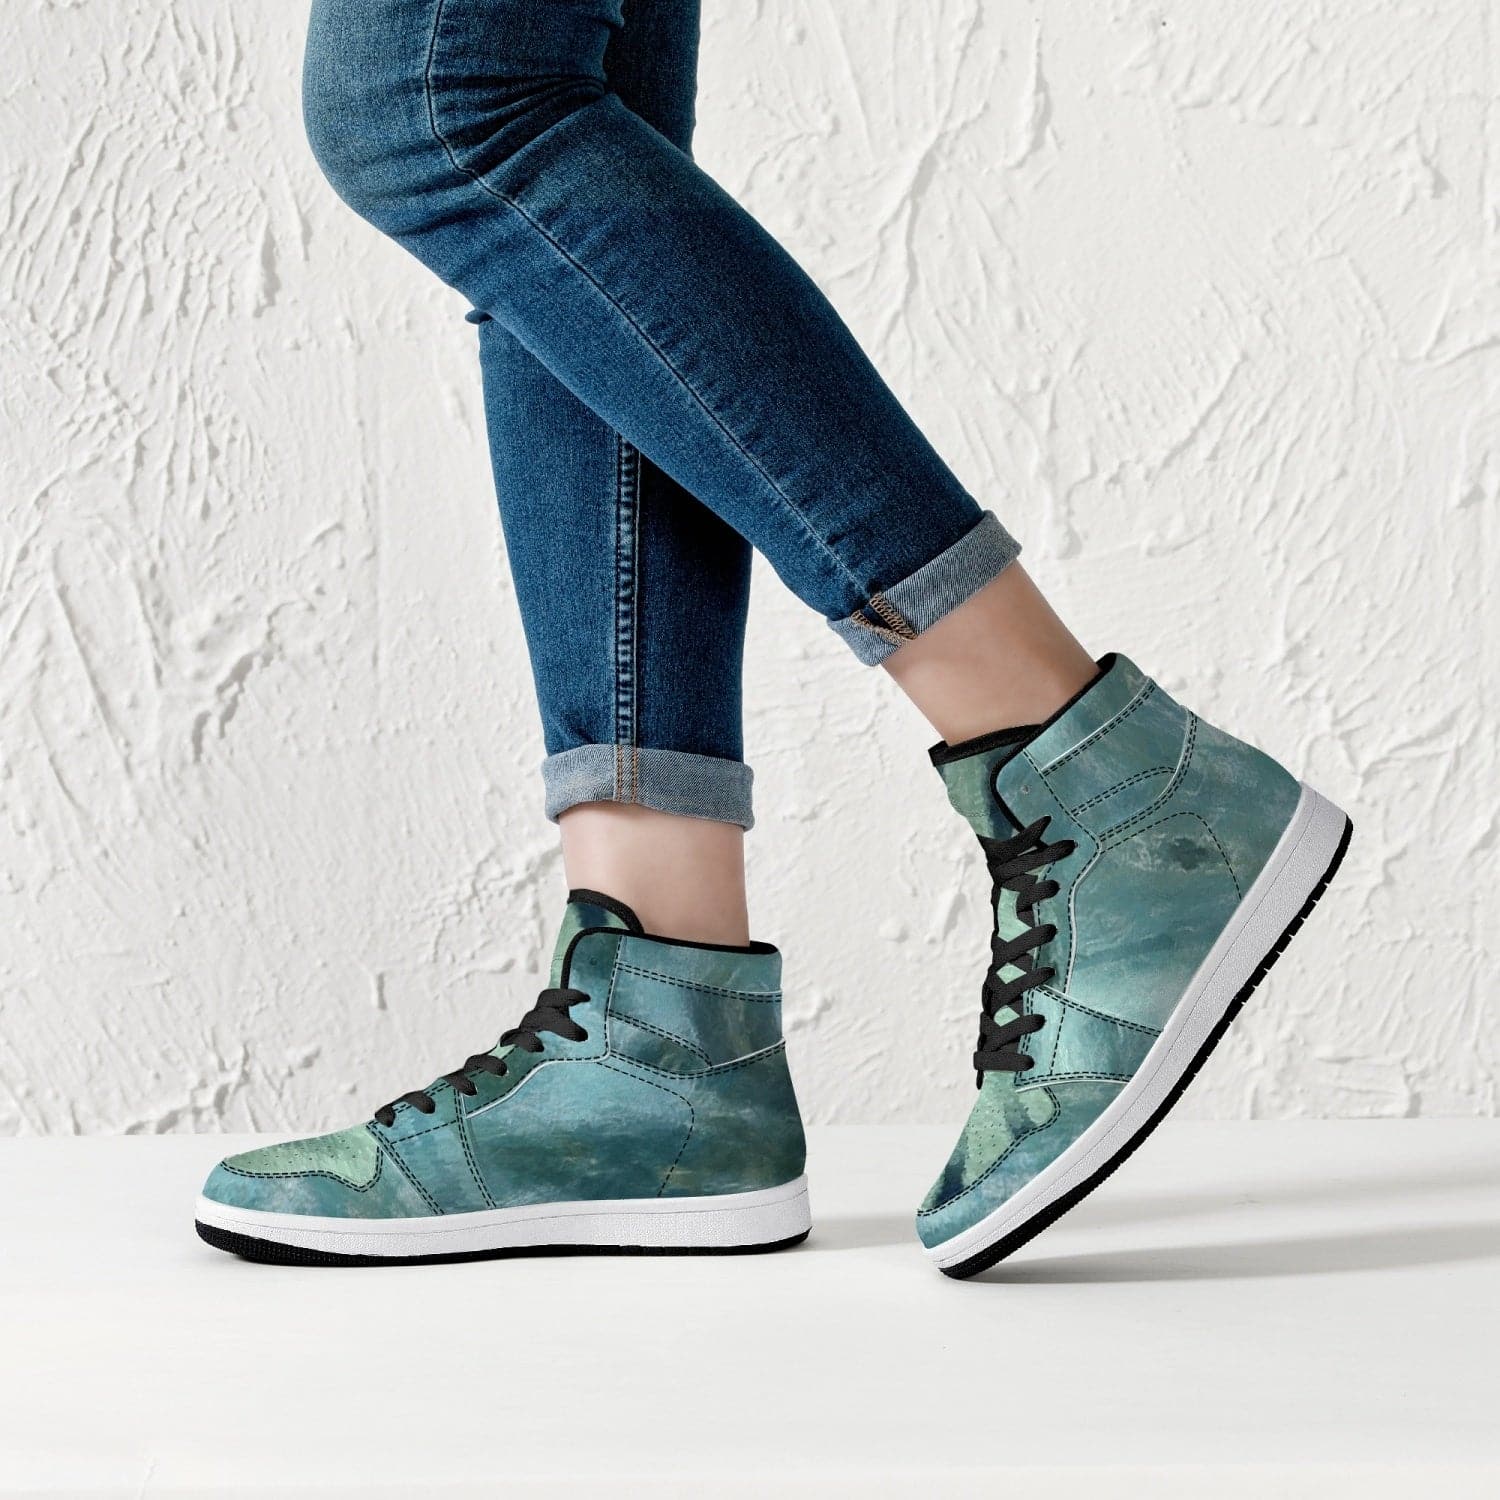 'Mountain Stream Green' High-Top Leather Sneakers - White / Black, design: Humphrey Isselt for Sensus Studio